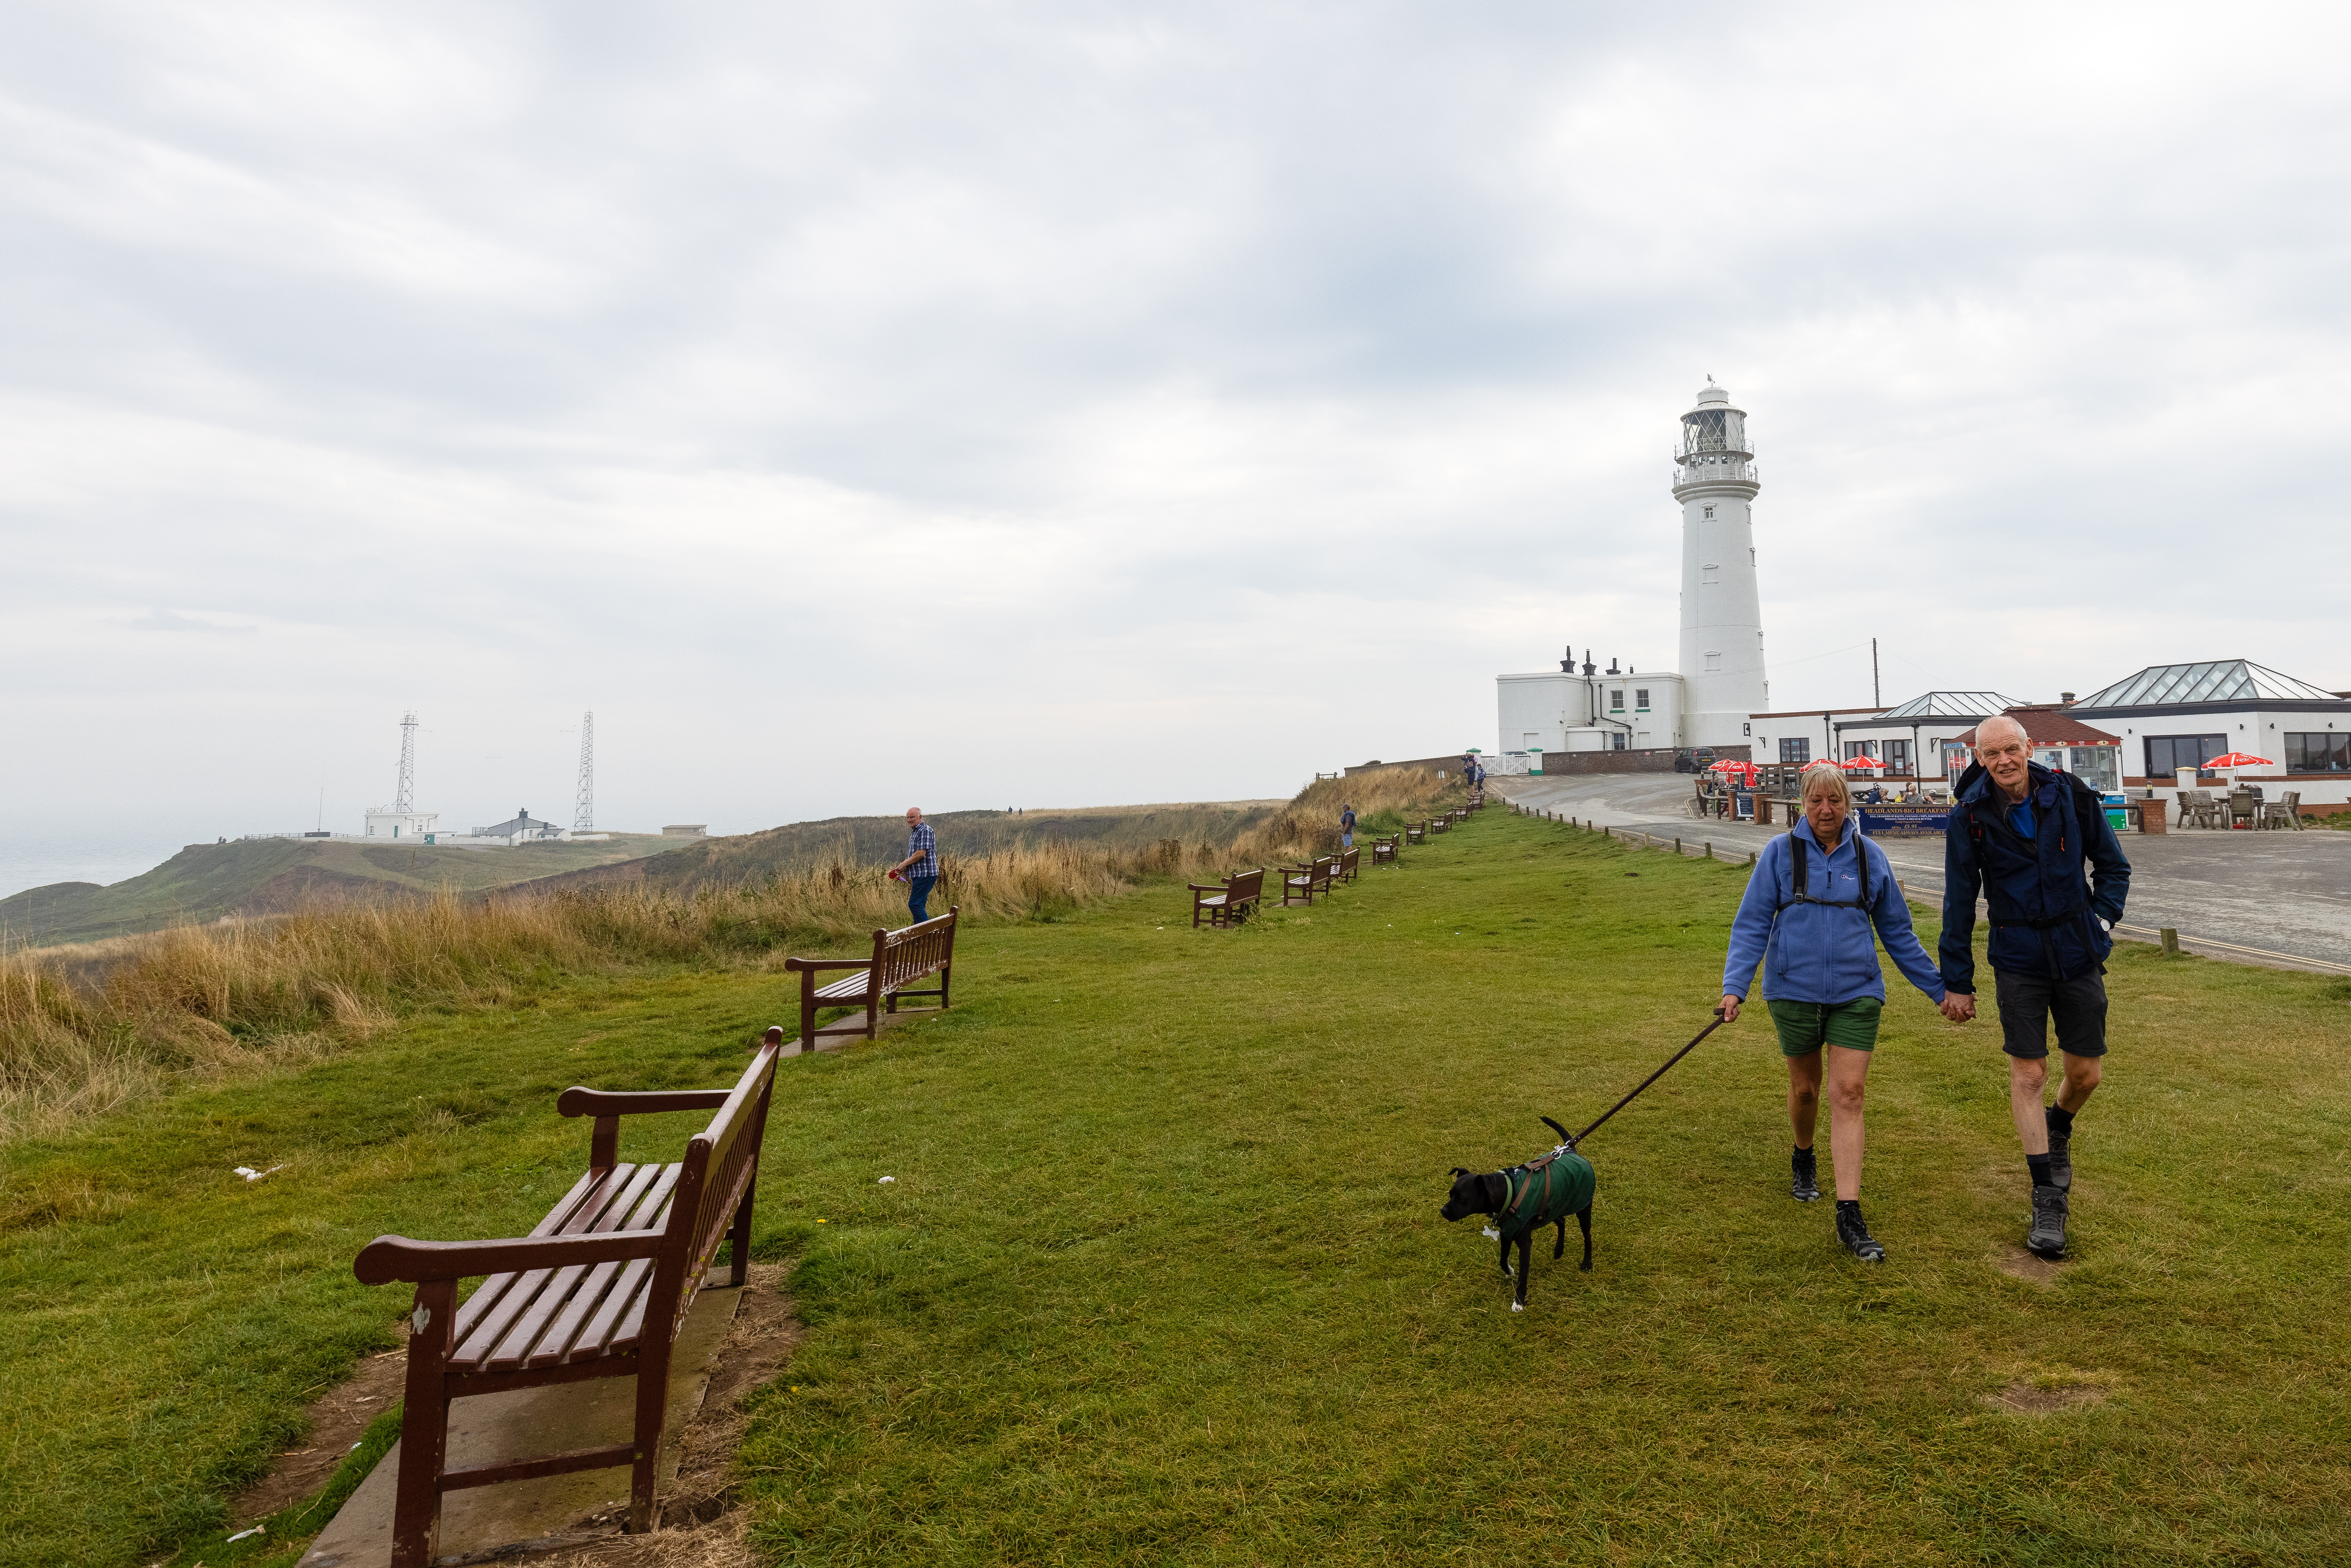 Couple in Flamborough with dog and lighthouse in the background